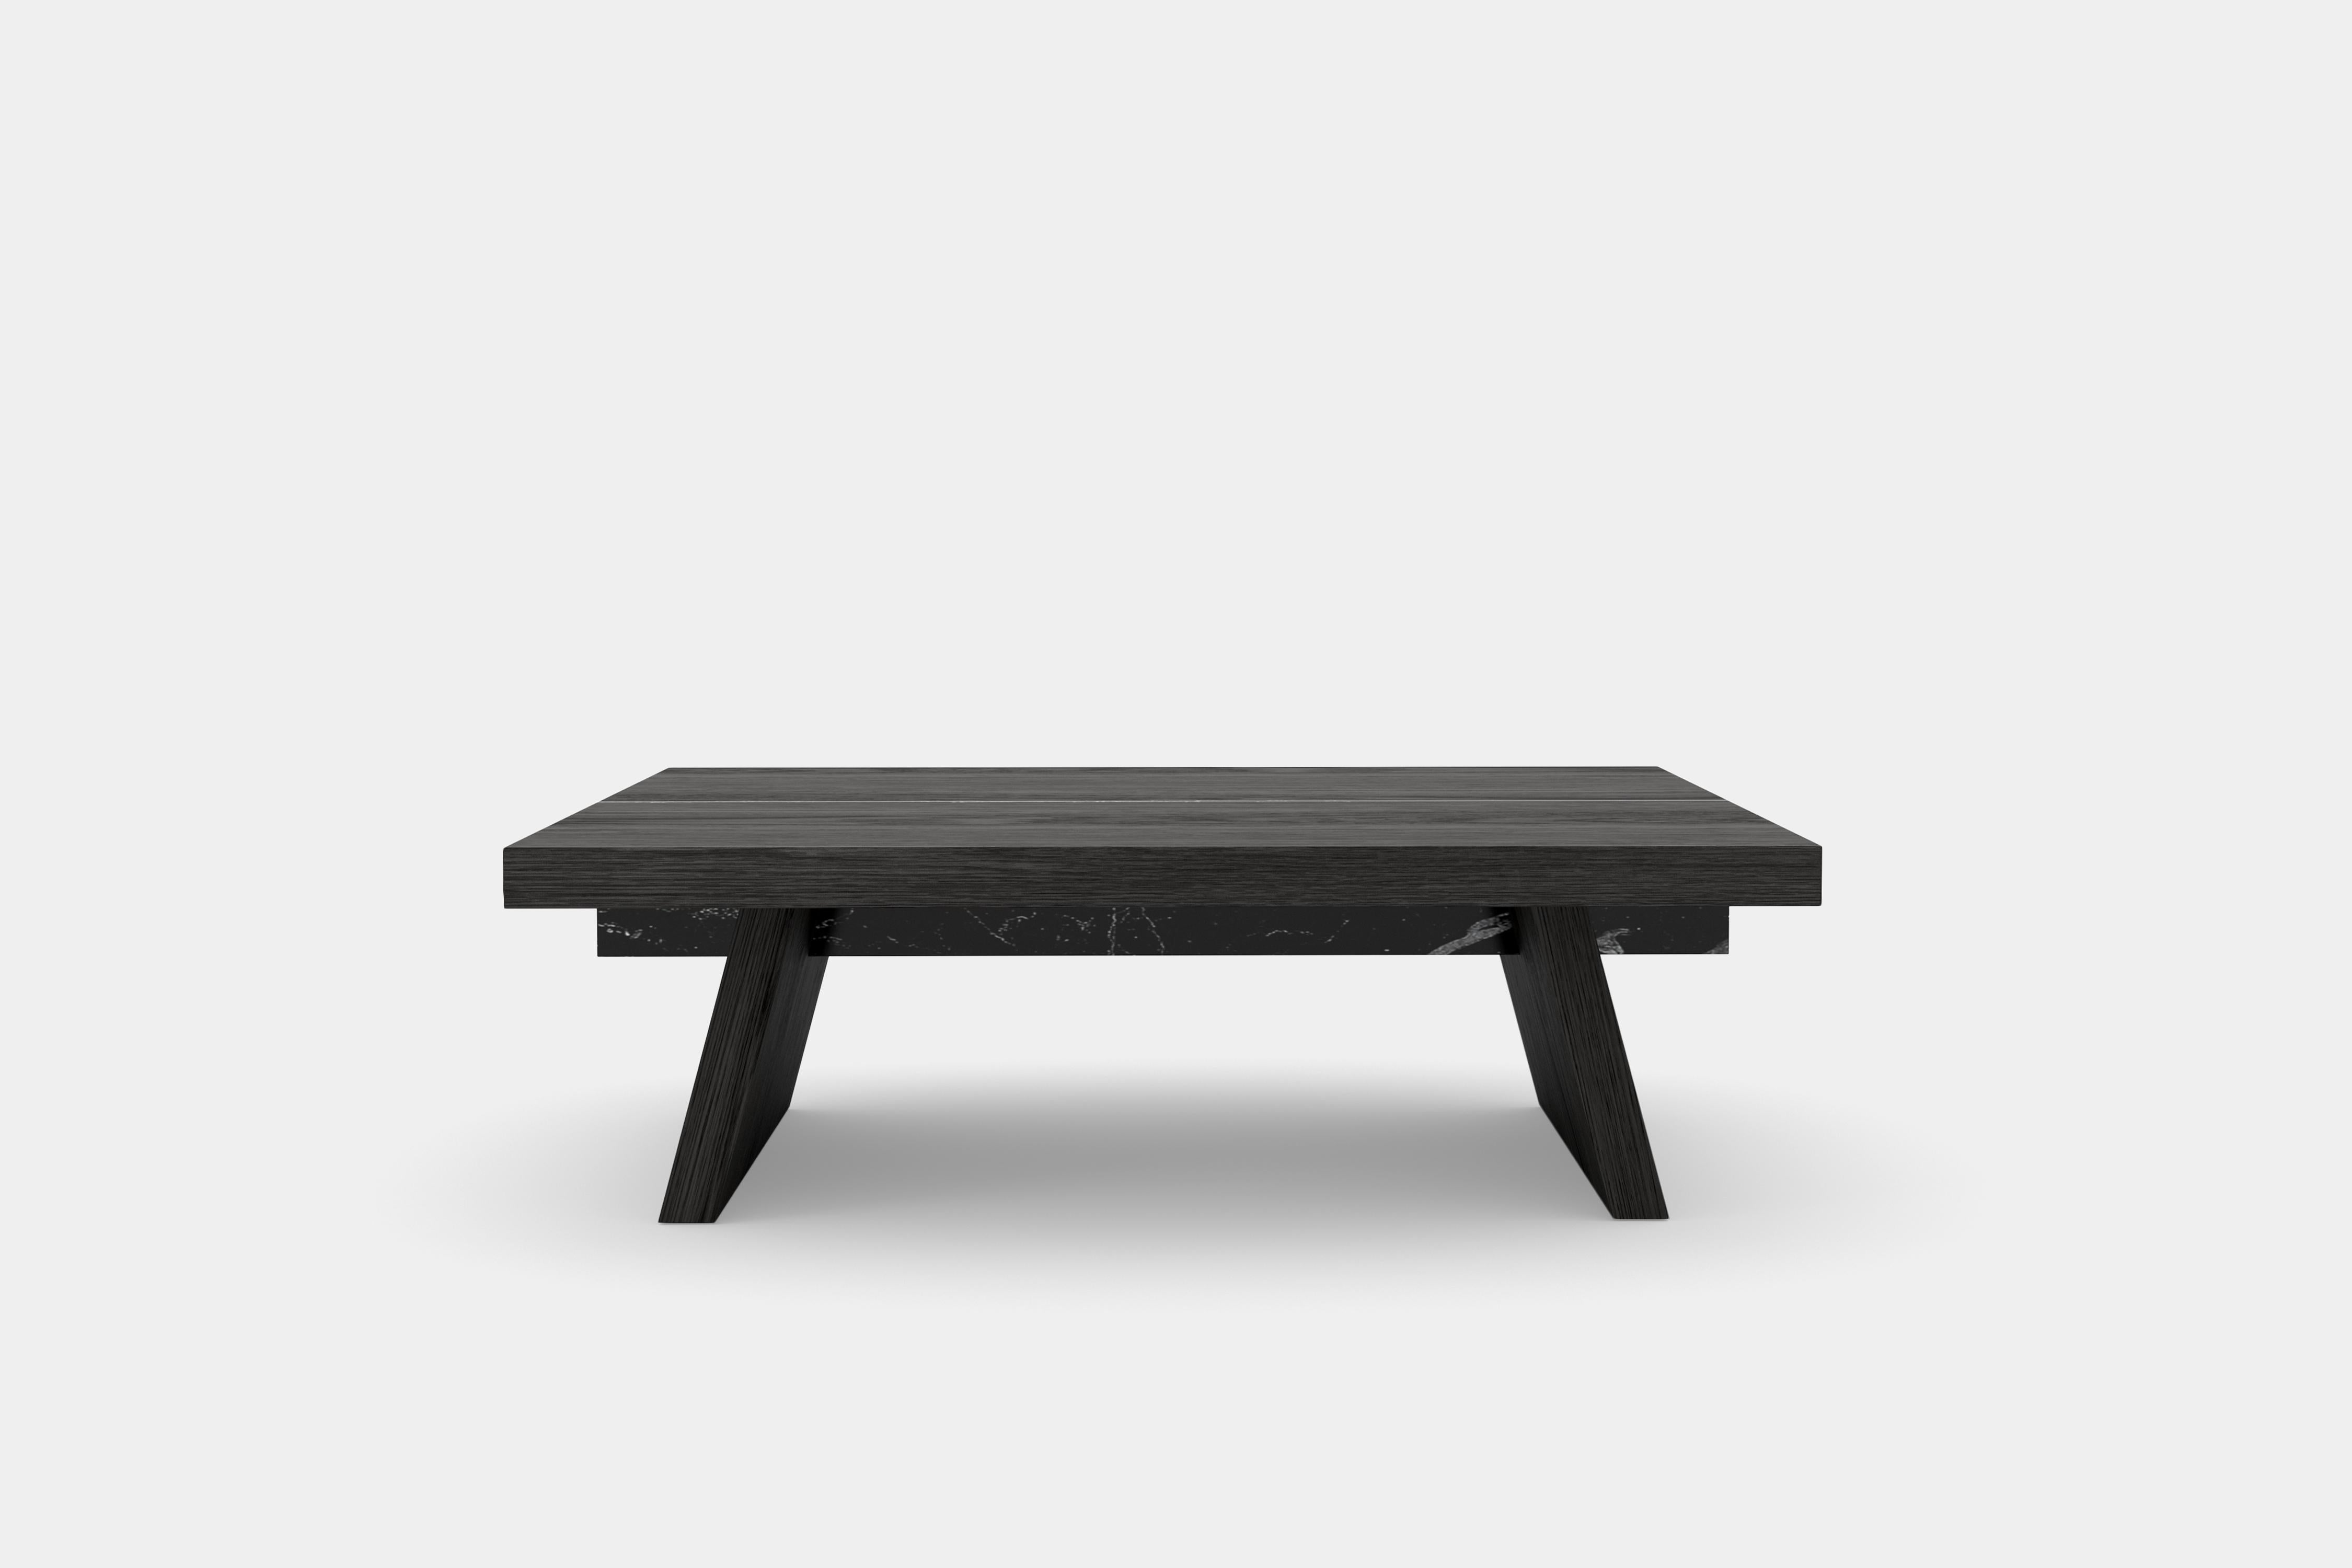 Burnished Laws of Motion Square Coffee Table in Black Solid Wood and Marble, Joel Escalona